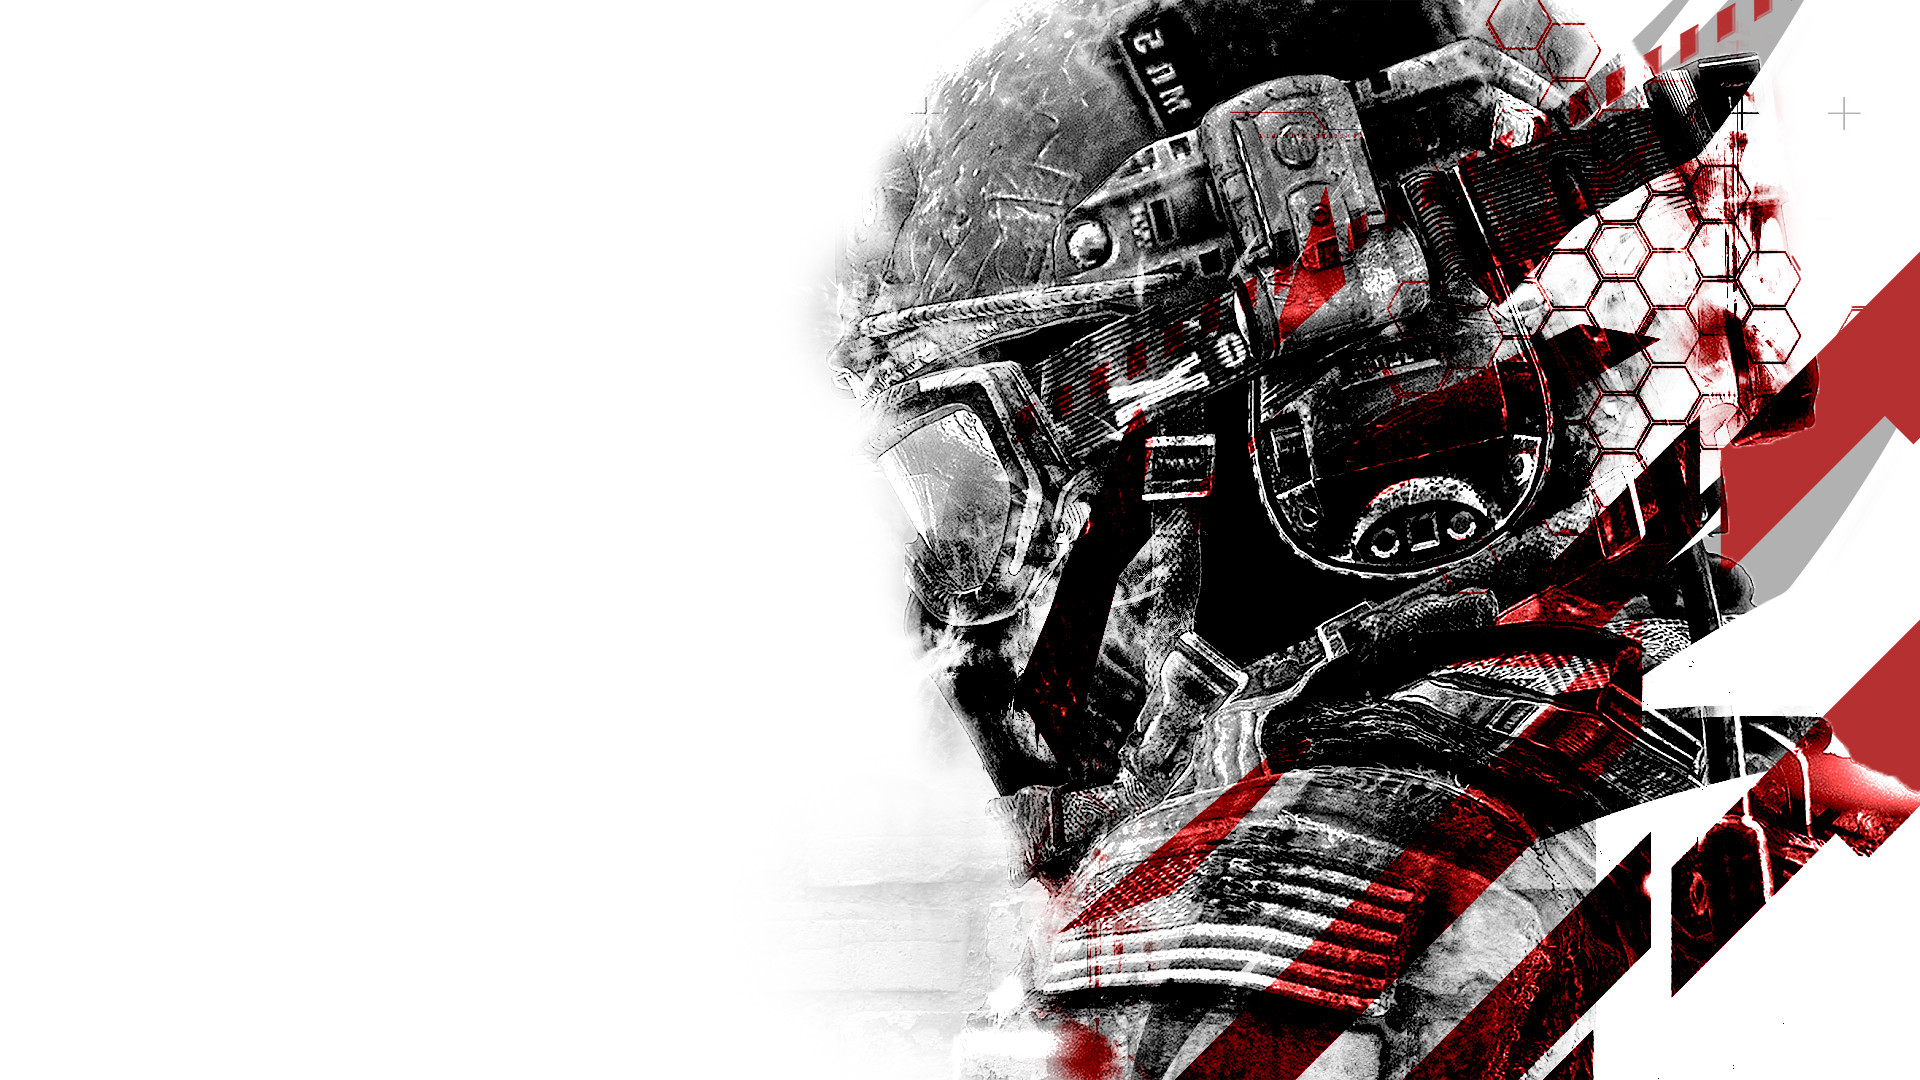 1920x1080 Soldier Wallpaper by NIHILUSDESIGNS Soldier Wallpaper by NIHILUSDESIGNS